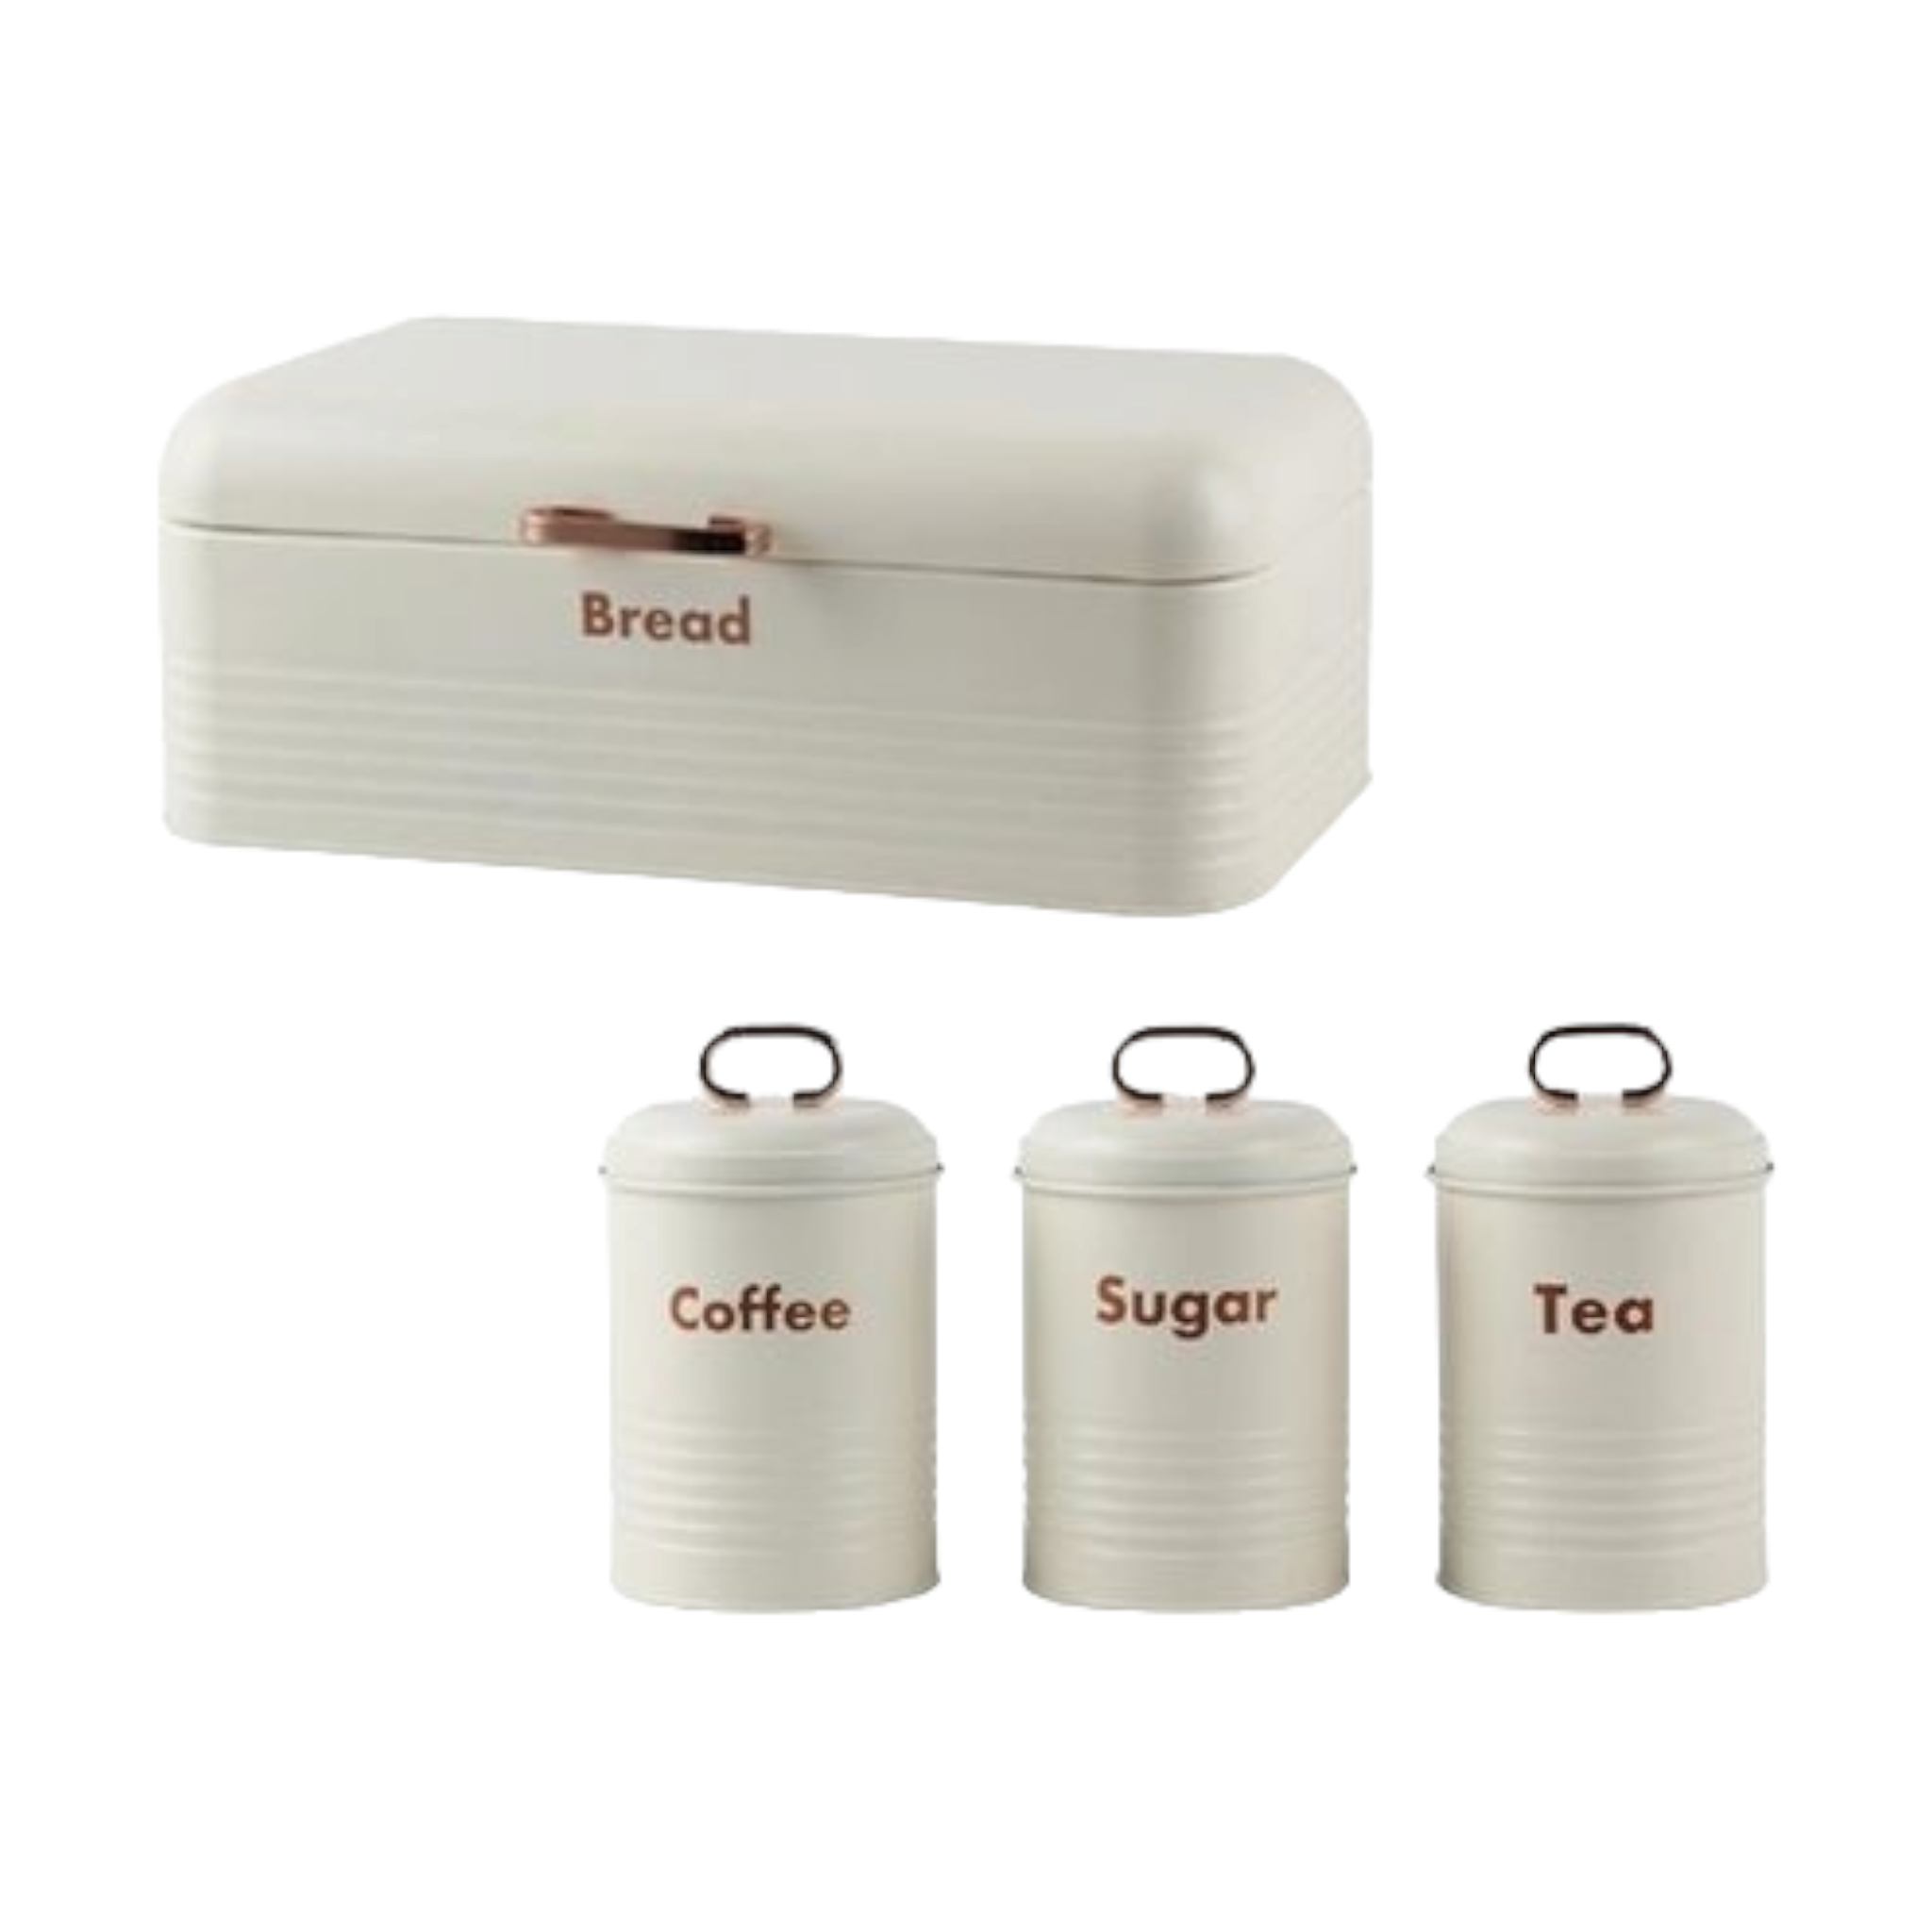 Totally Home Retro Bread Bin with Gold Handle & 3pc Canister Set Tea-Coffee-Sugar TH105